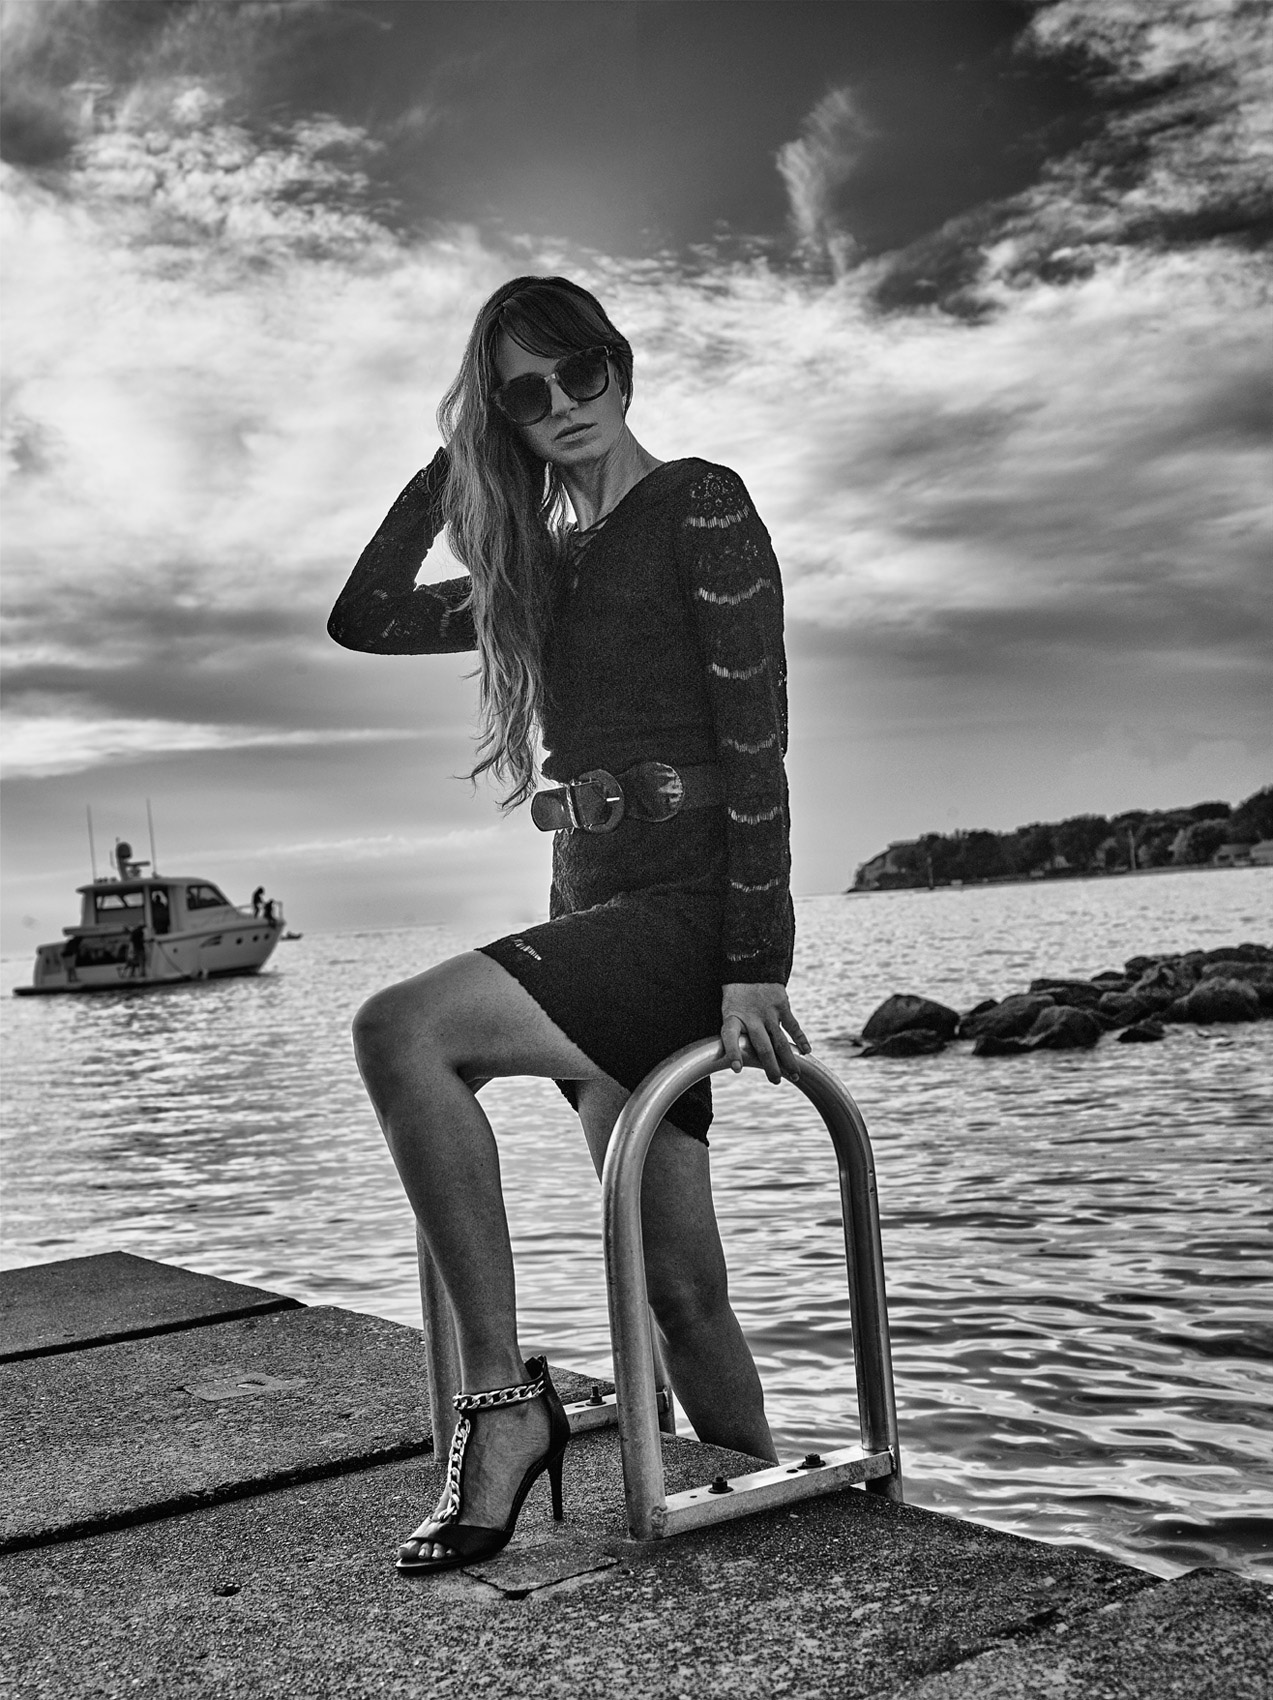  CASTAWAY_Model April In Black Dress & Sunglasses On Dock Ladder Holding Rail As Yacht Leaves Bay Island Rocks With Clouds Above Skyline At Catawba Island Country Club Pier 